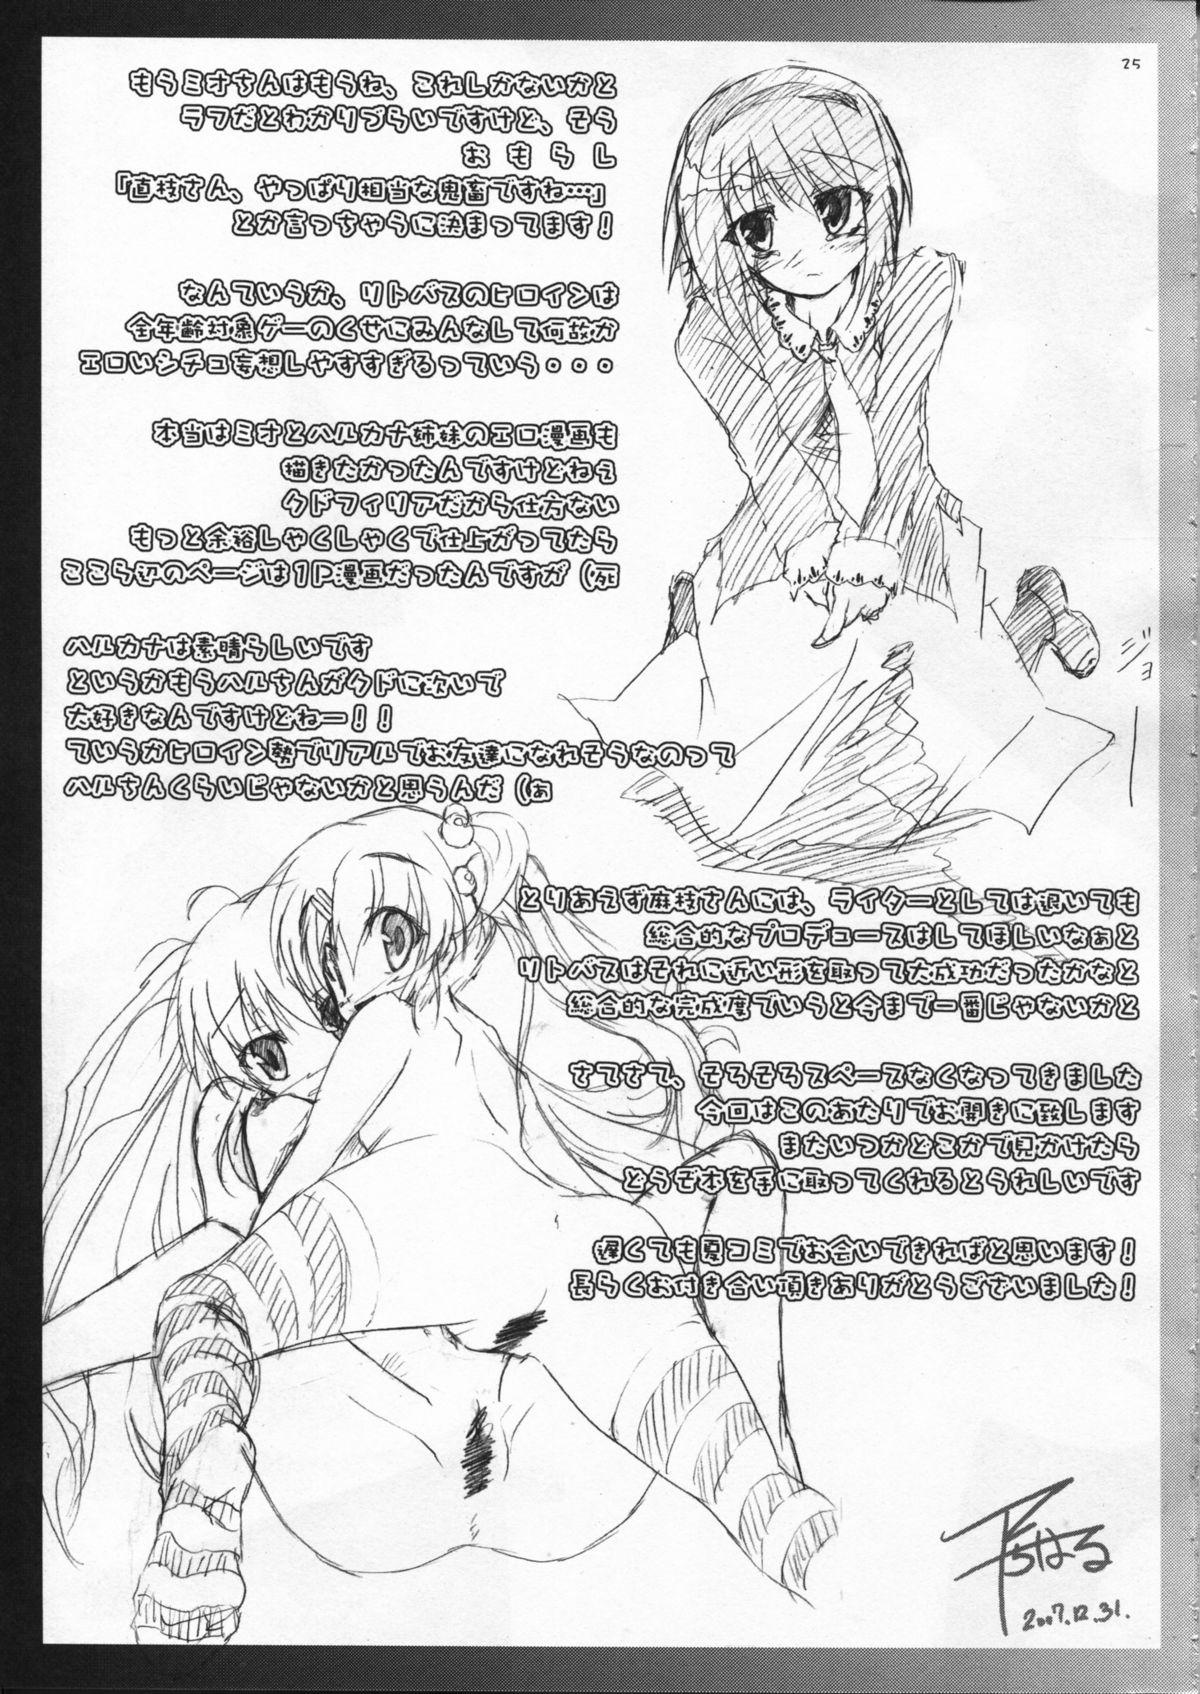 Indian Wanko no Jikan - Little busters Glamour Porn - Page 25